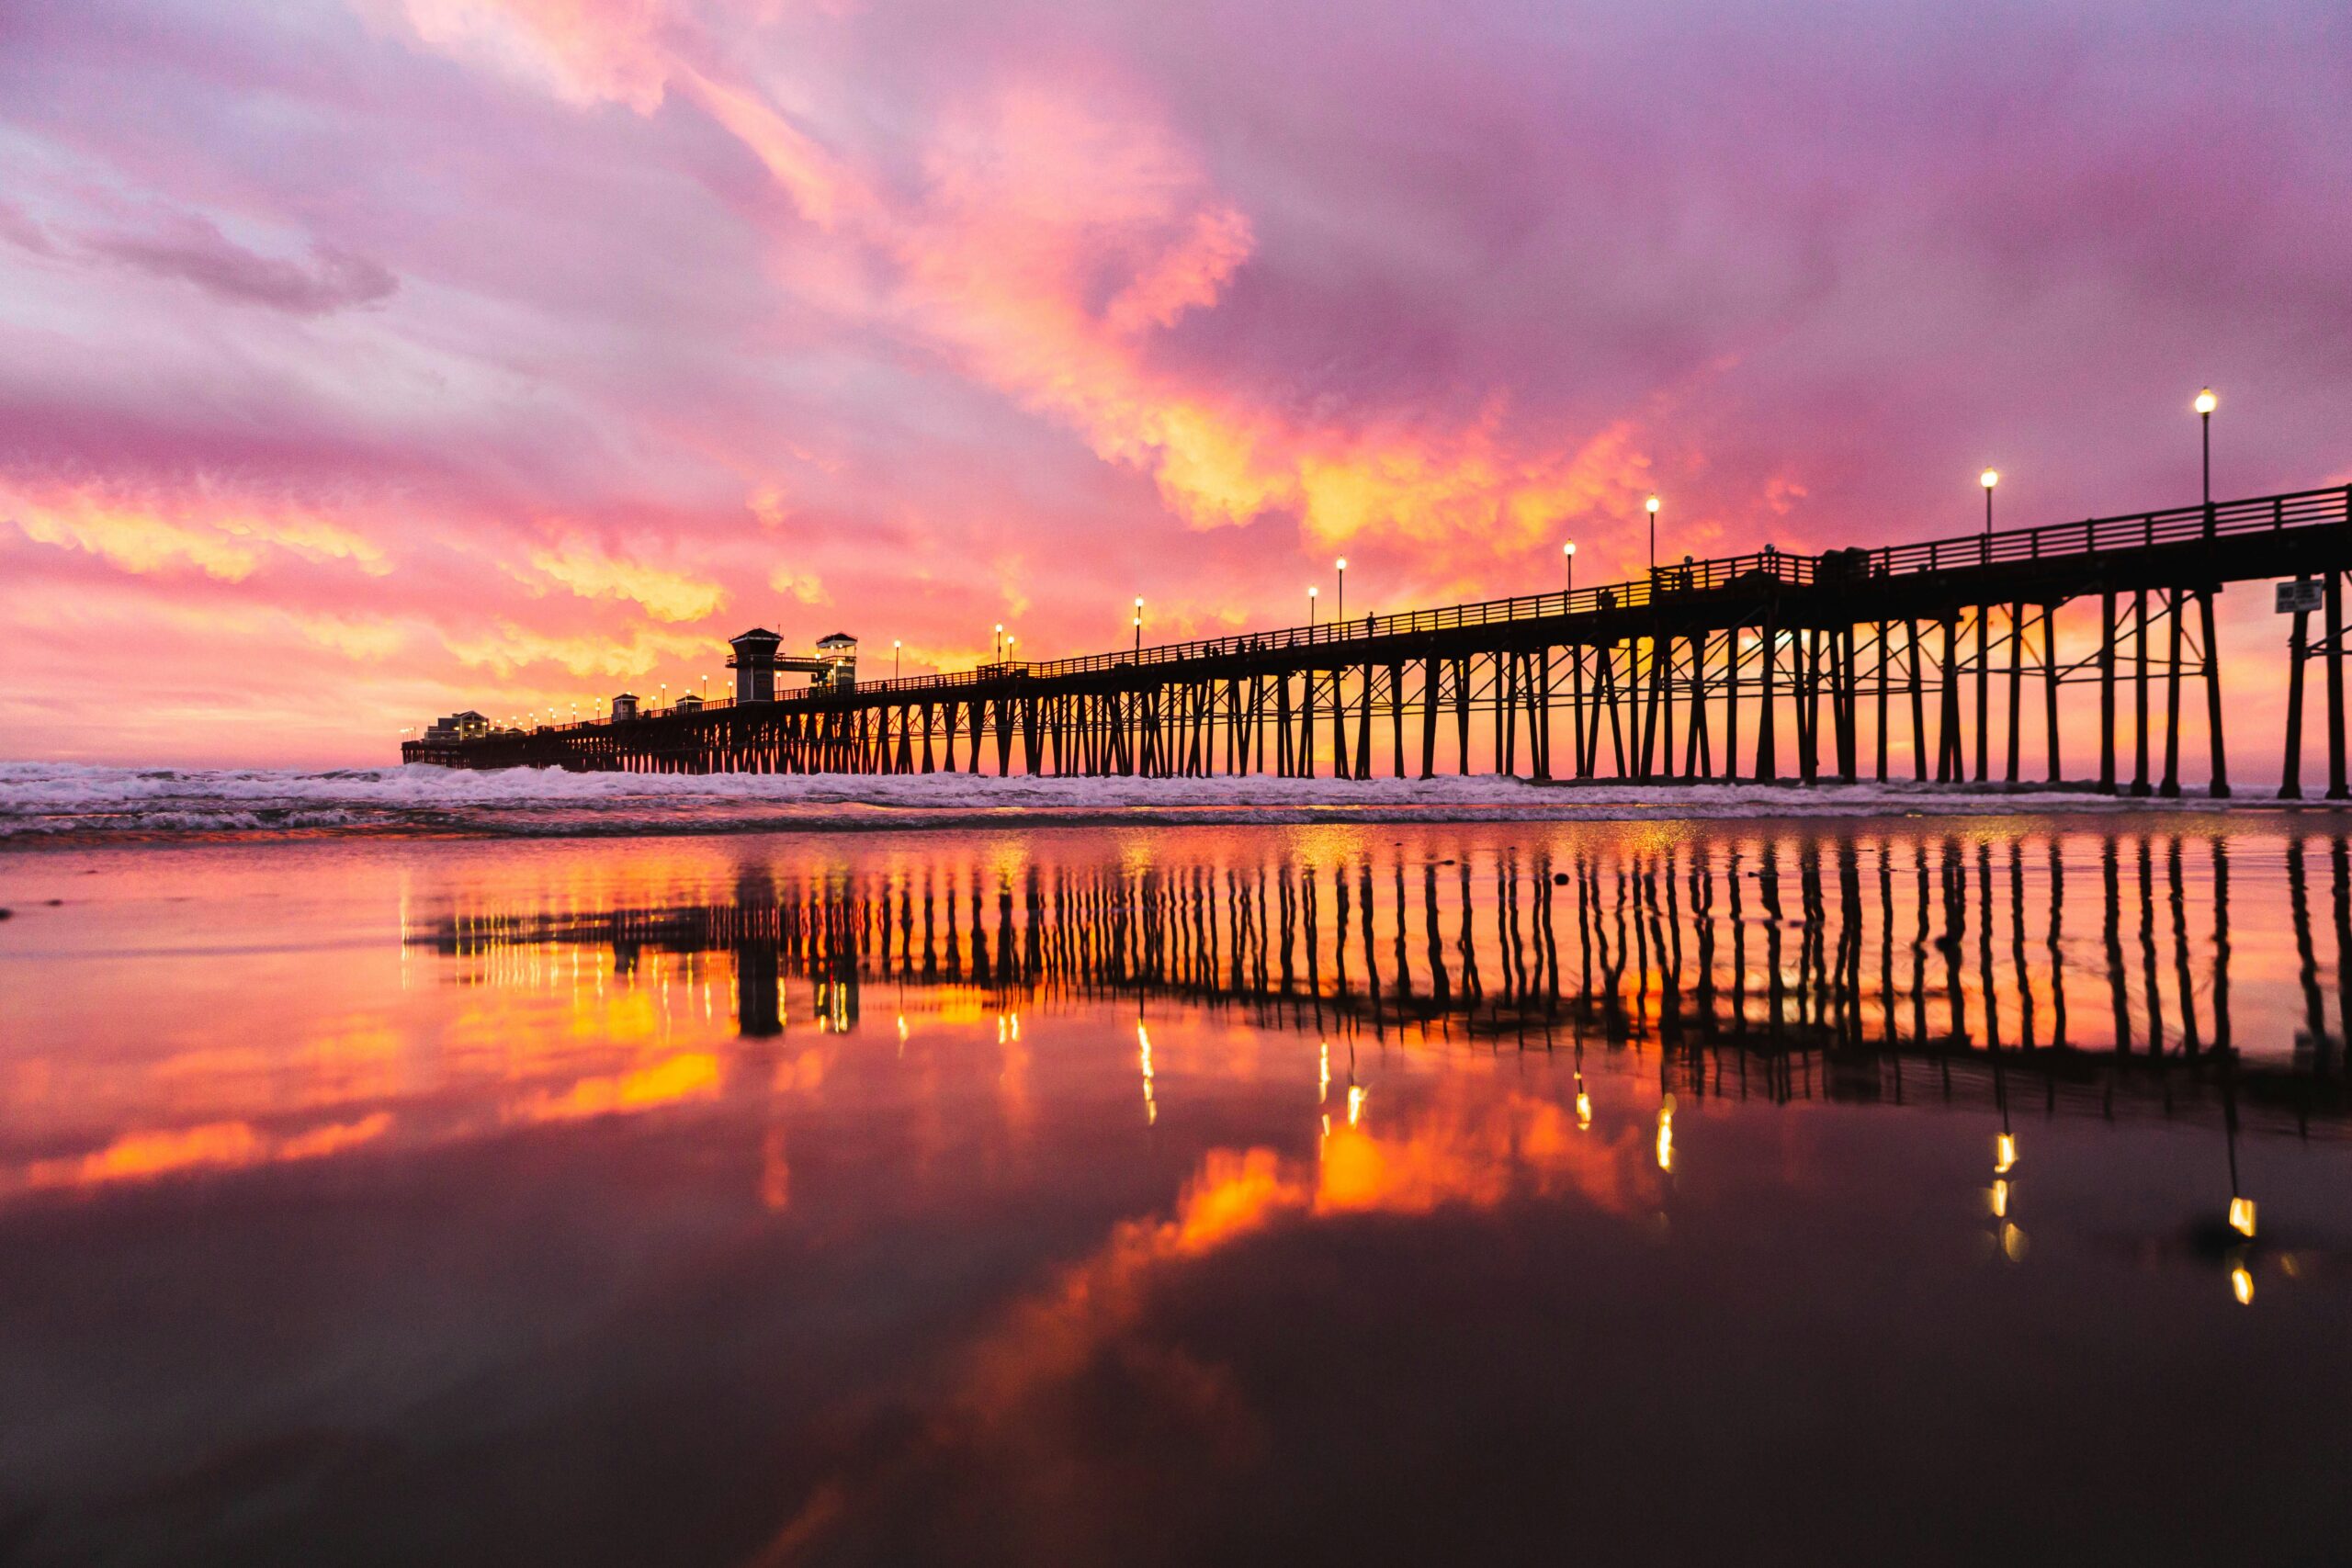 45-degree view of the Oceanside Pier with a pink, purple, and gold sunset behind it.